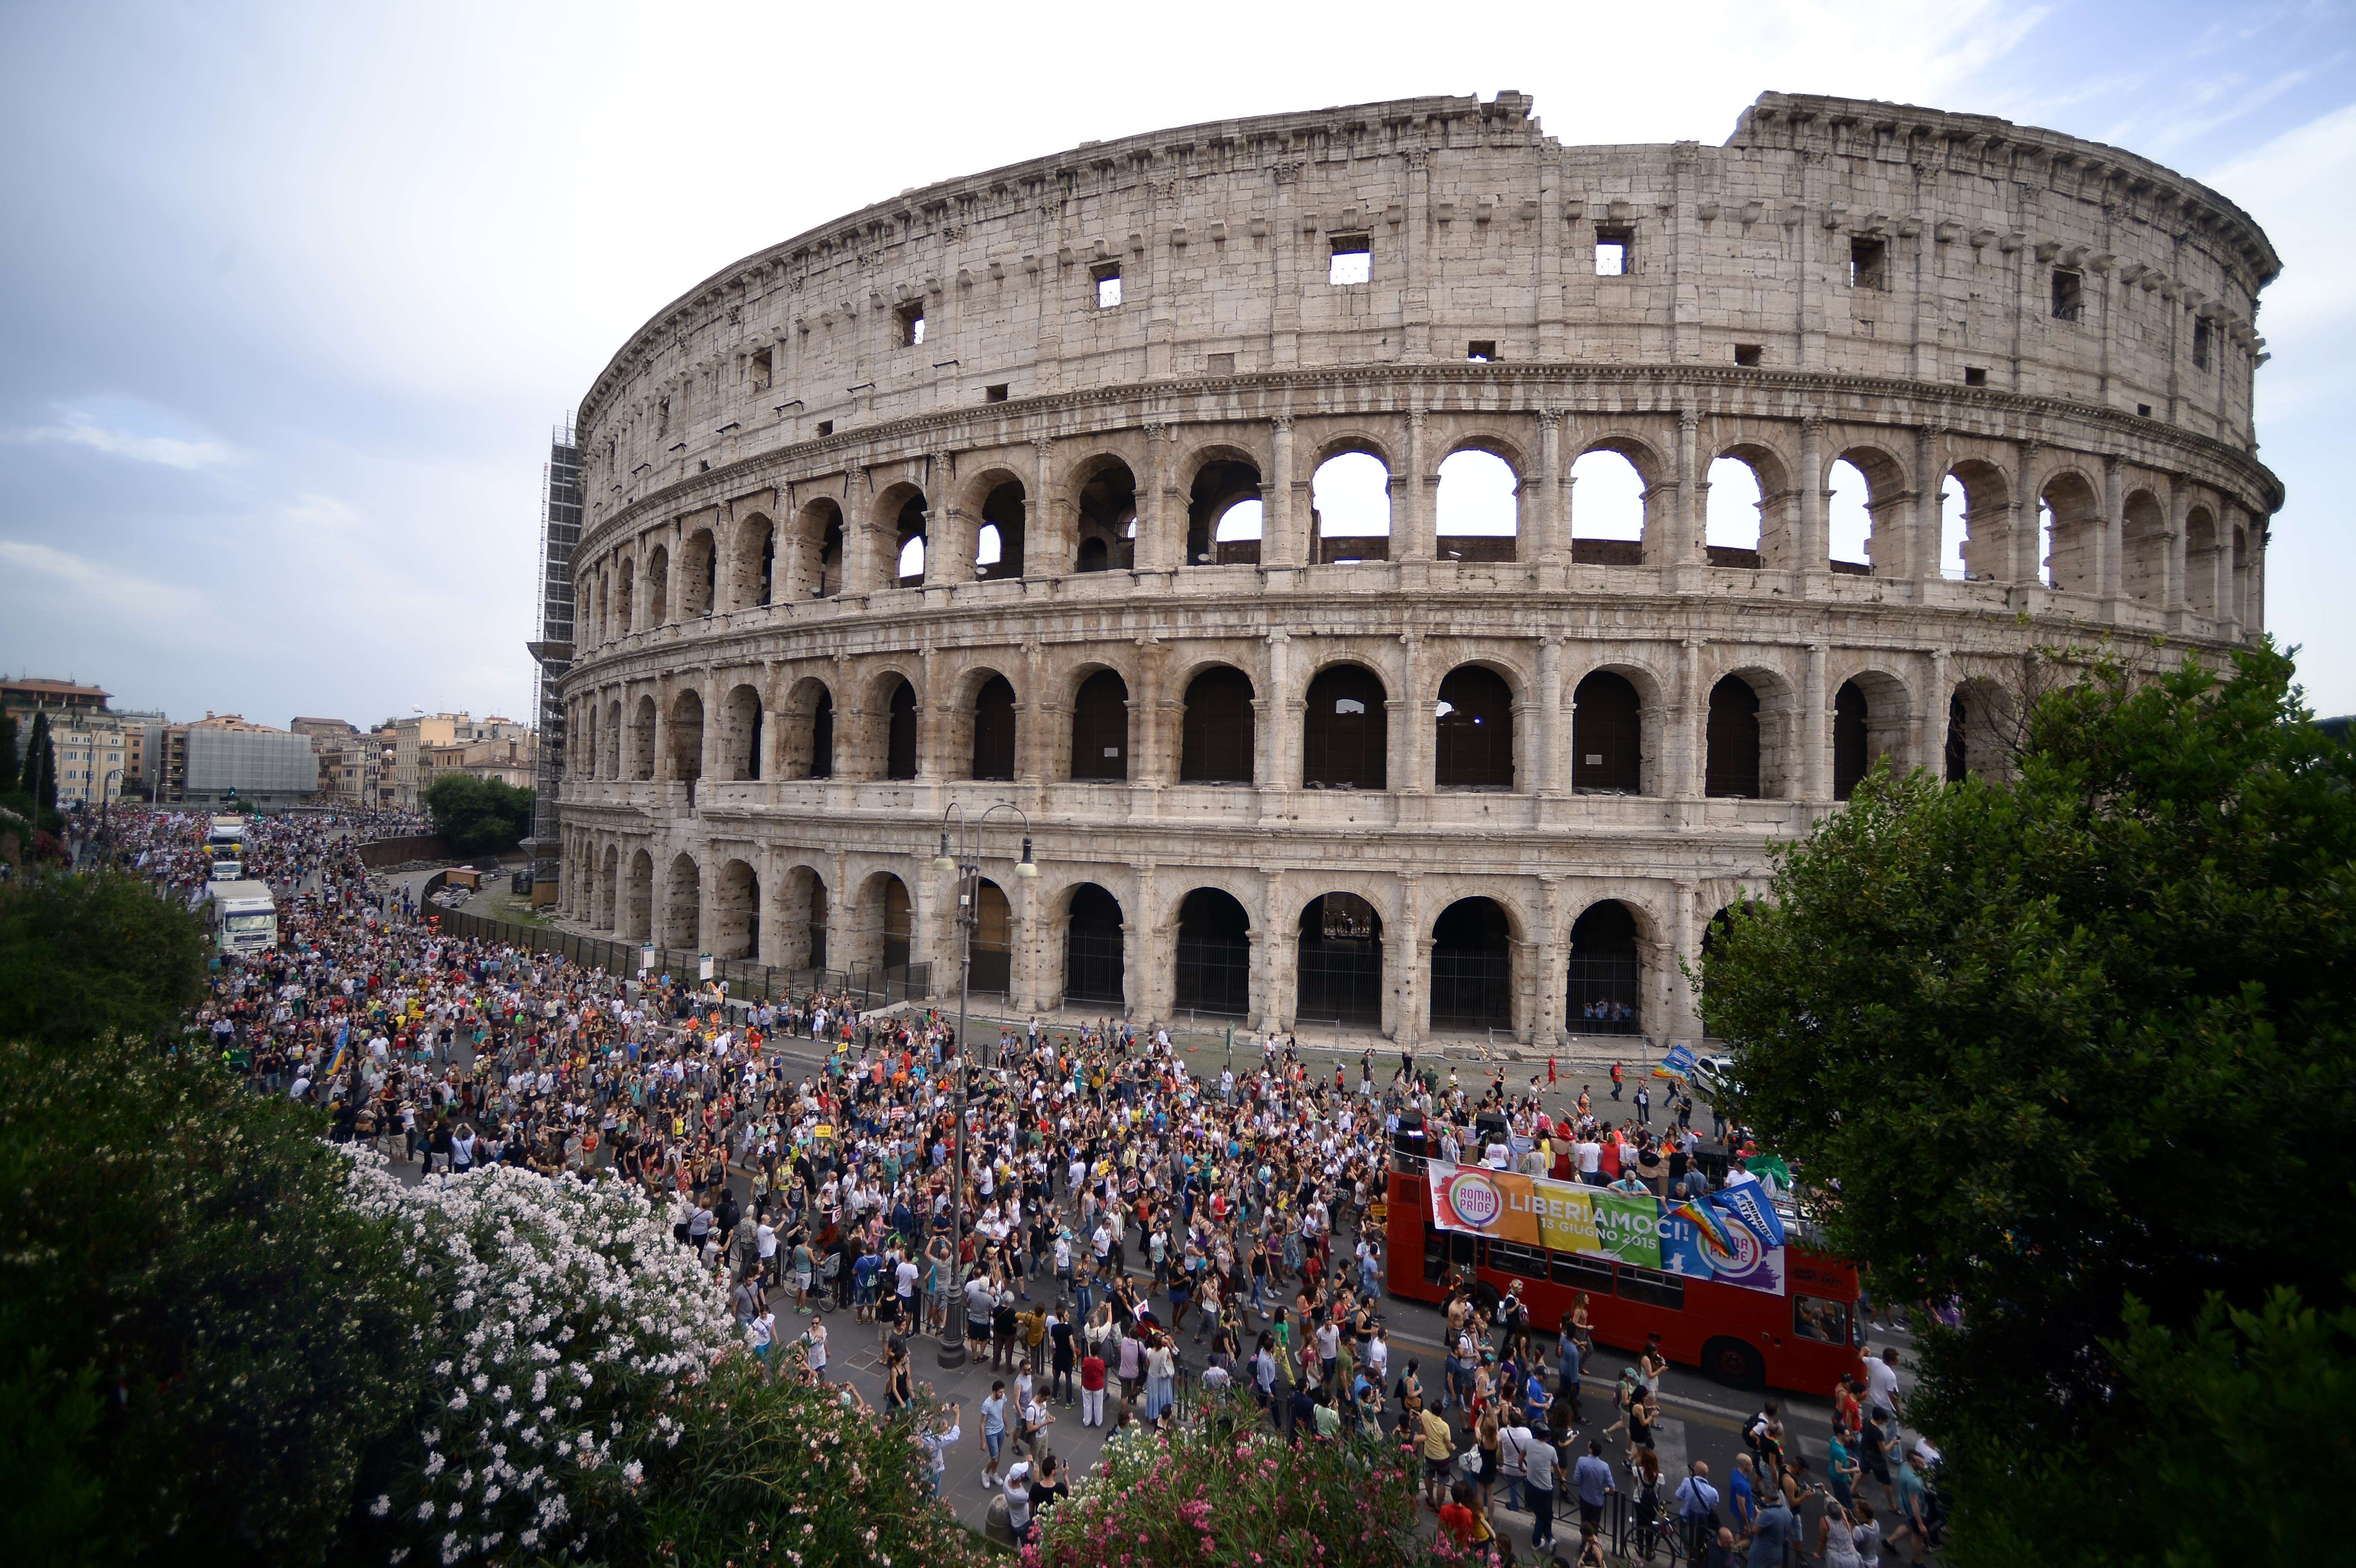 People march in front of the Colosseum during the Gay Pride Parade (LGBT) on June 13, 2015 in Rome.